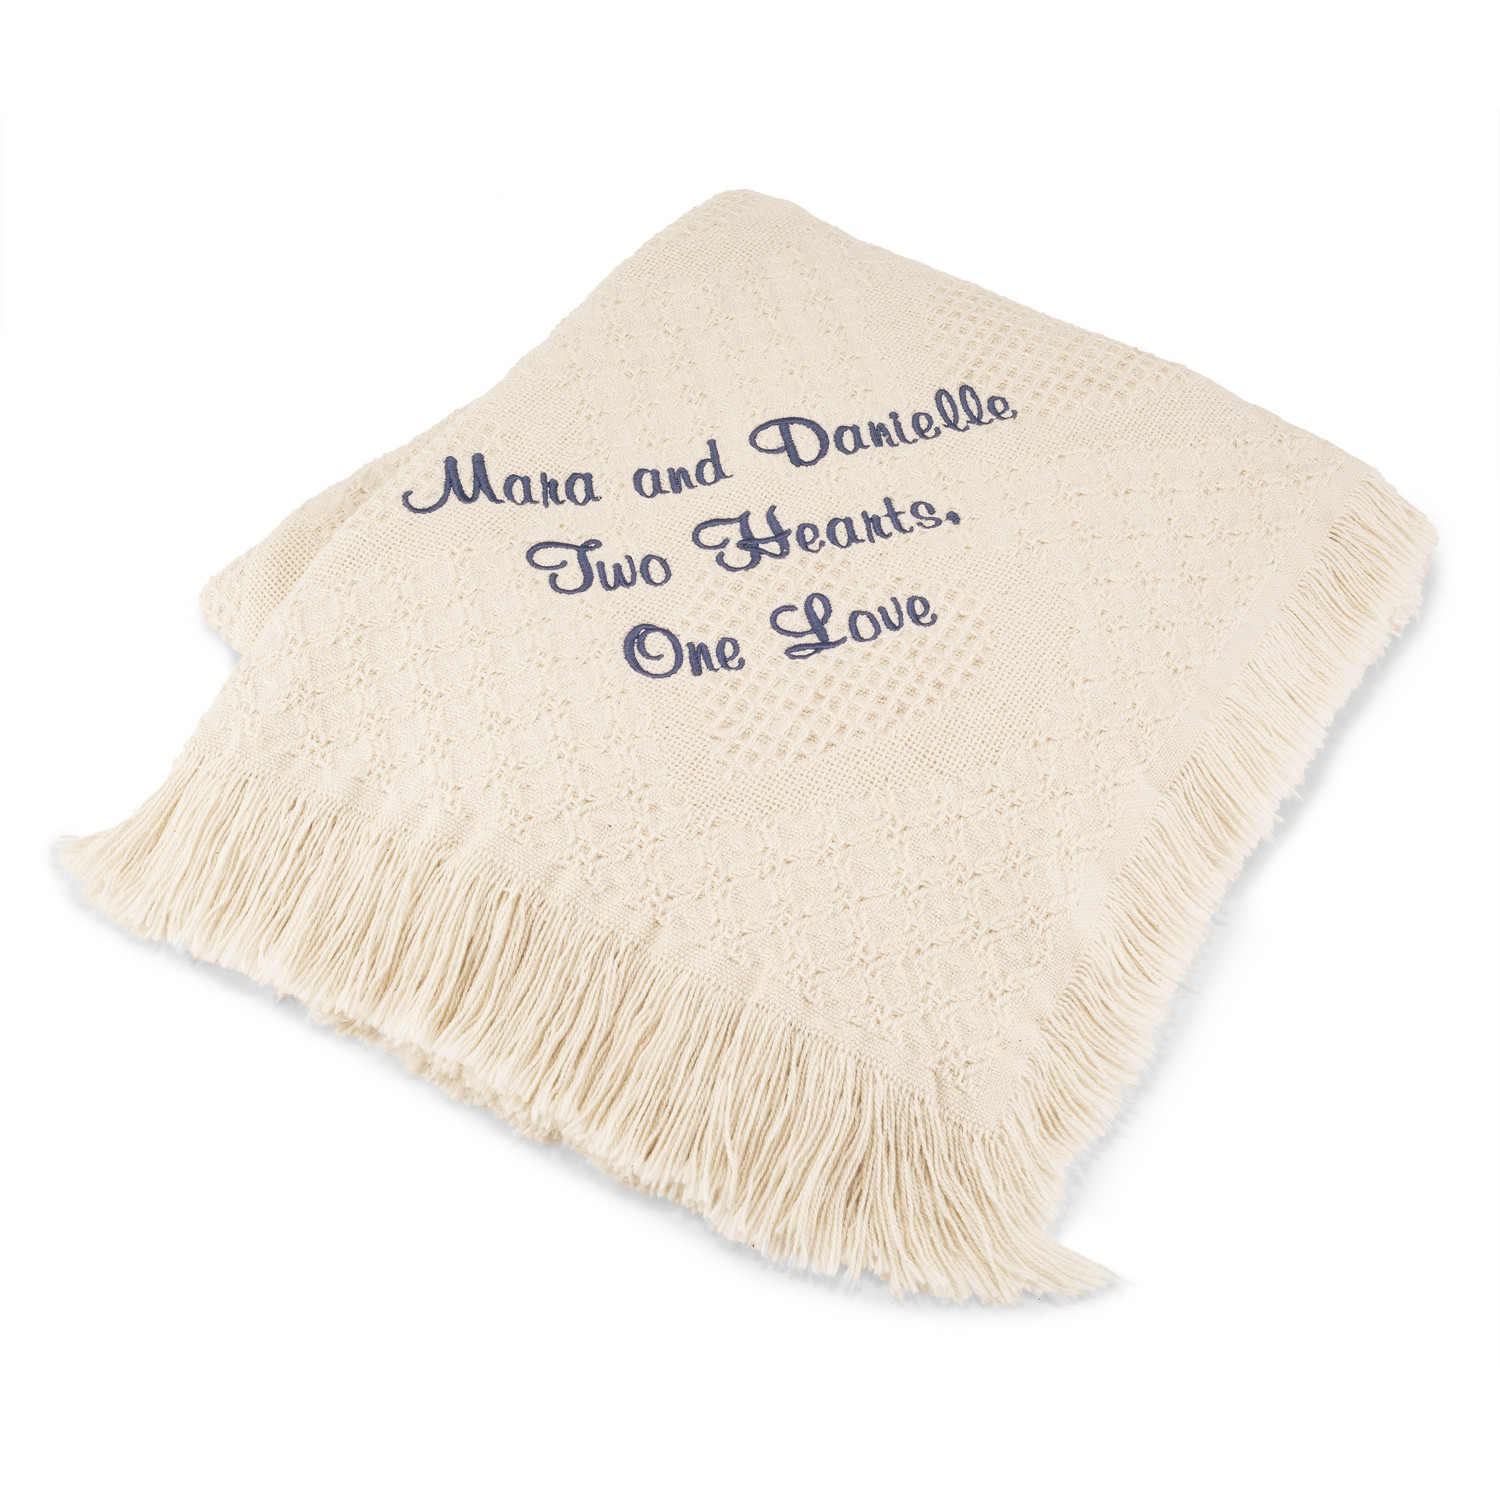 22 Wonderful Sand Ceremony Vases Personalized 2024 free download sand ceremony vases personalized of personalized blankets pillows at things remembered within antique white heart throw